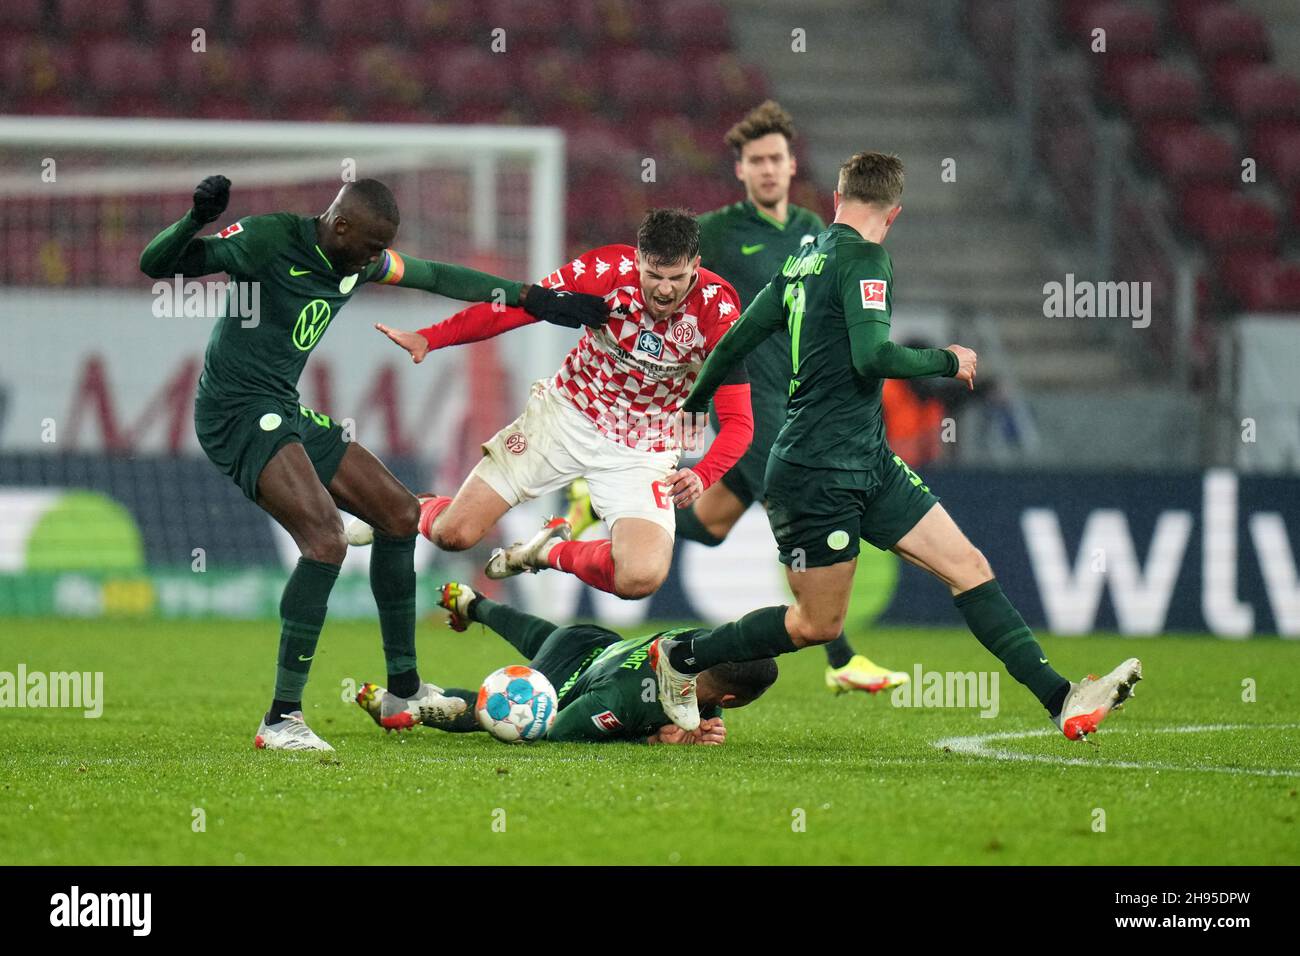 Mainz, Germany. 04th Dec, 2021. Football: Bundesliga, FSV Mainz 05 - VfL Wolfsburg, Matchday 14, Mewa Arena. Mainz's Anton Stach (M) is rudely stopped by Wolfsburg's Josuha Guilavogui (l), Lukas Nmecha (on the ground) and Yannick Gerhardt. Credit: Thomas Frey/dpa - IMPORTANT NOTE: In accordance with the regulations of the DFL Deutsche Fußball Liga and/or the DFB Deutscher Fußball-Bund, it is prohibited to use or have used photographs taken in the stadium and/or of the match in the form of sequence pictures and/or video-like photo series./dpa/Alamy Live News Stock Photo